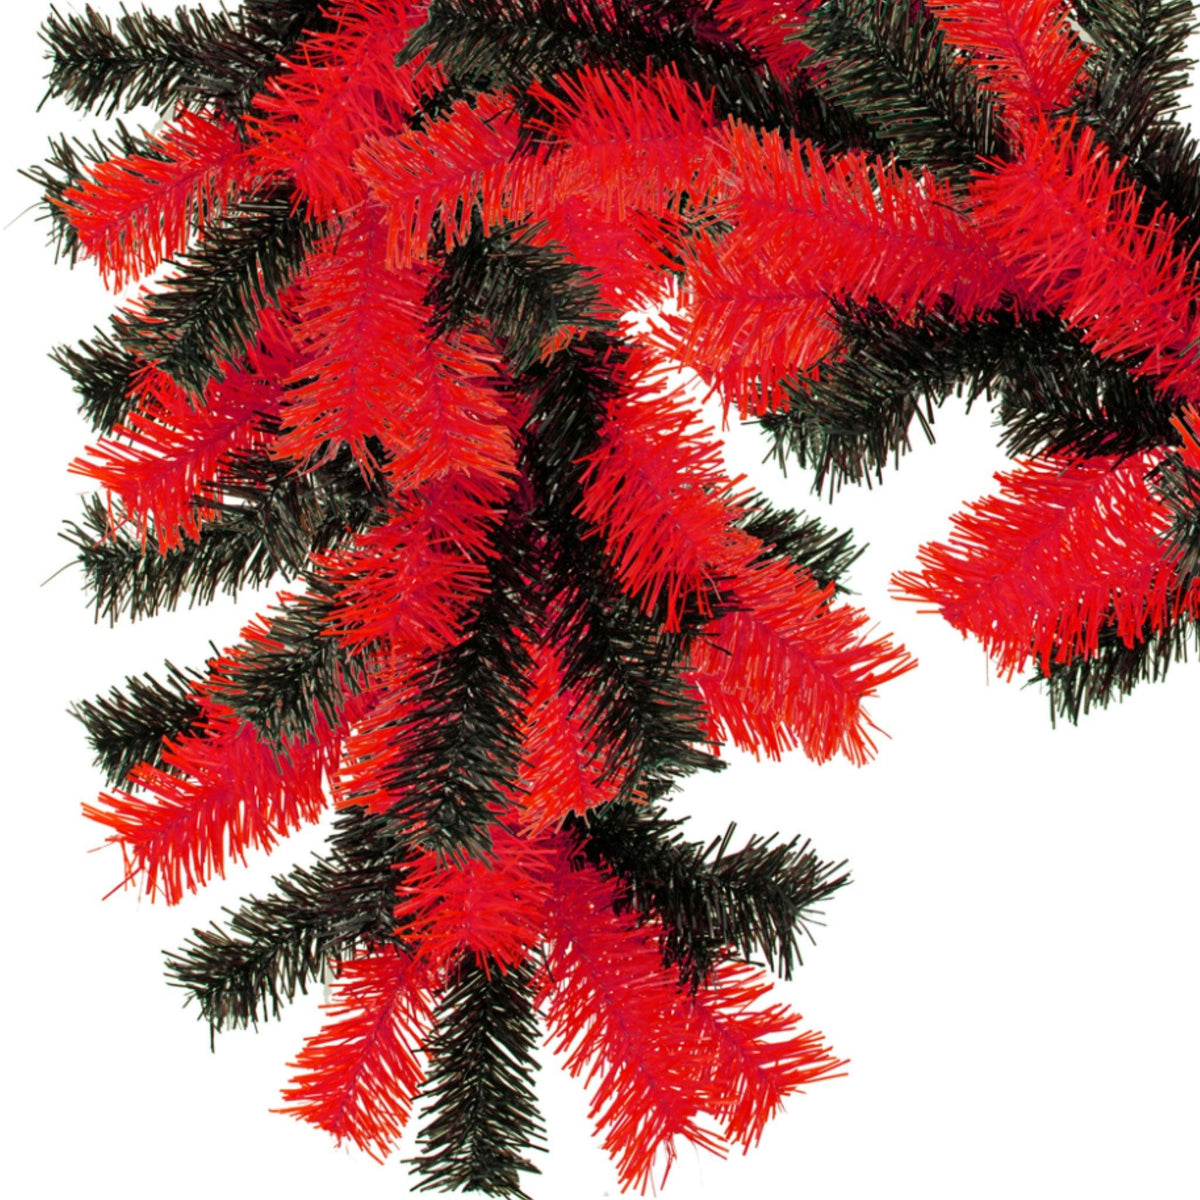 Shop for Lee Display's brand new 6FT Shiny Metallic Red and Black Tinsel Brush Garlands on sale now at leedisplay.com.  End